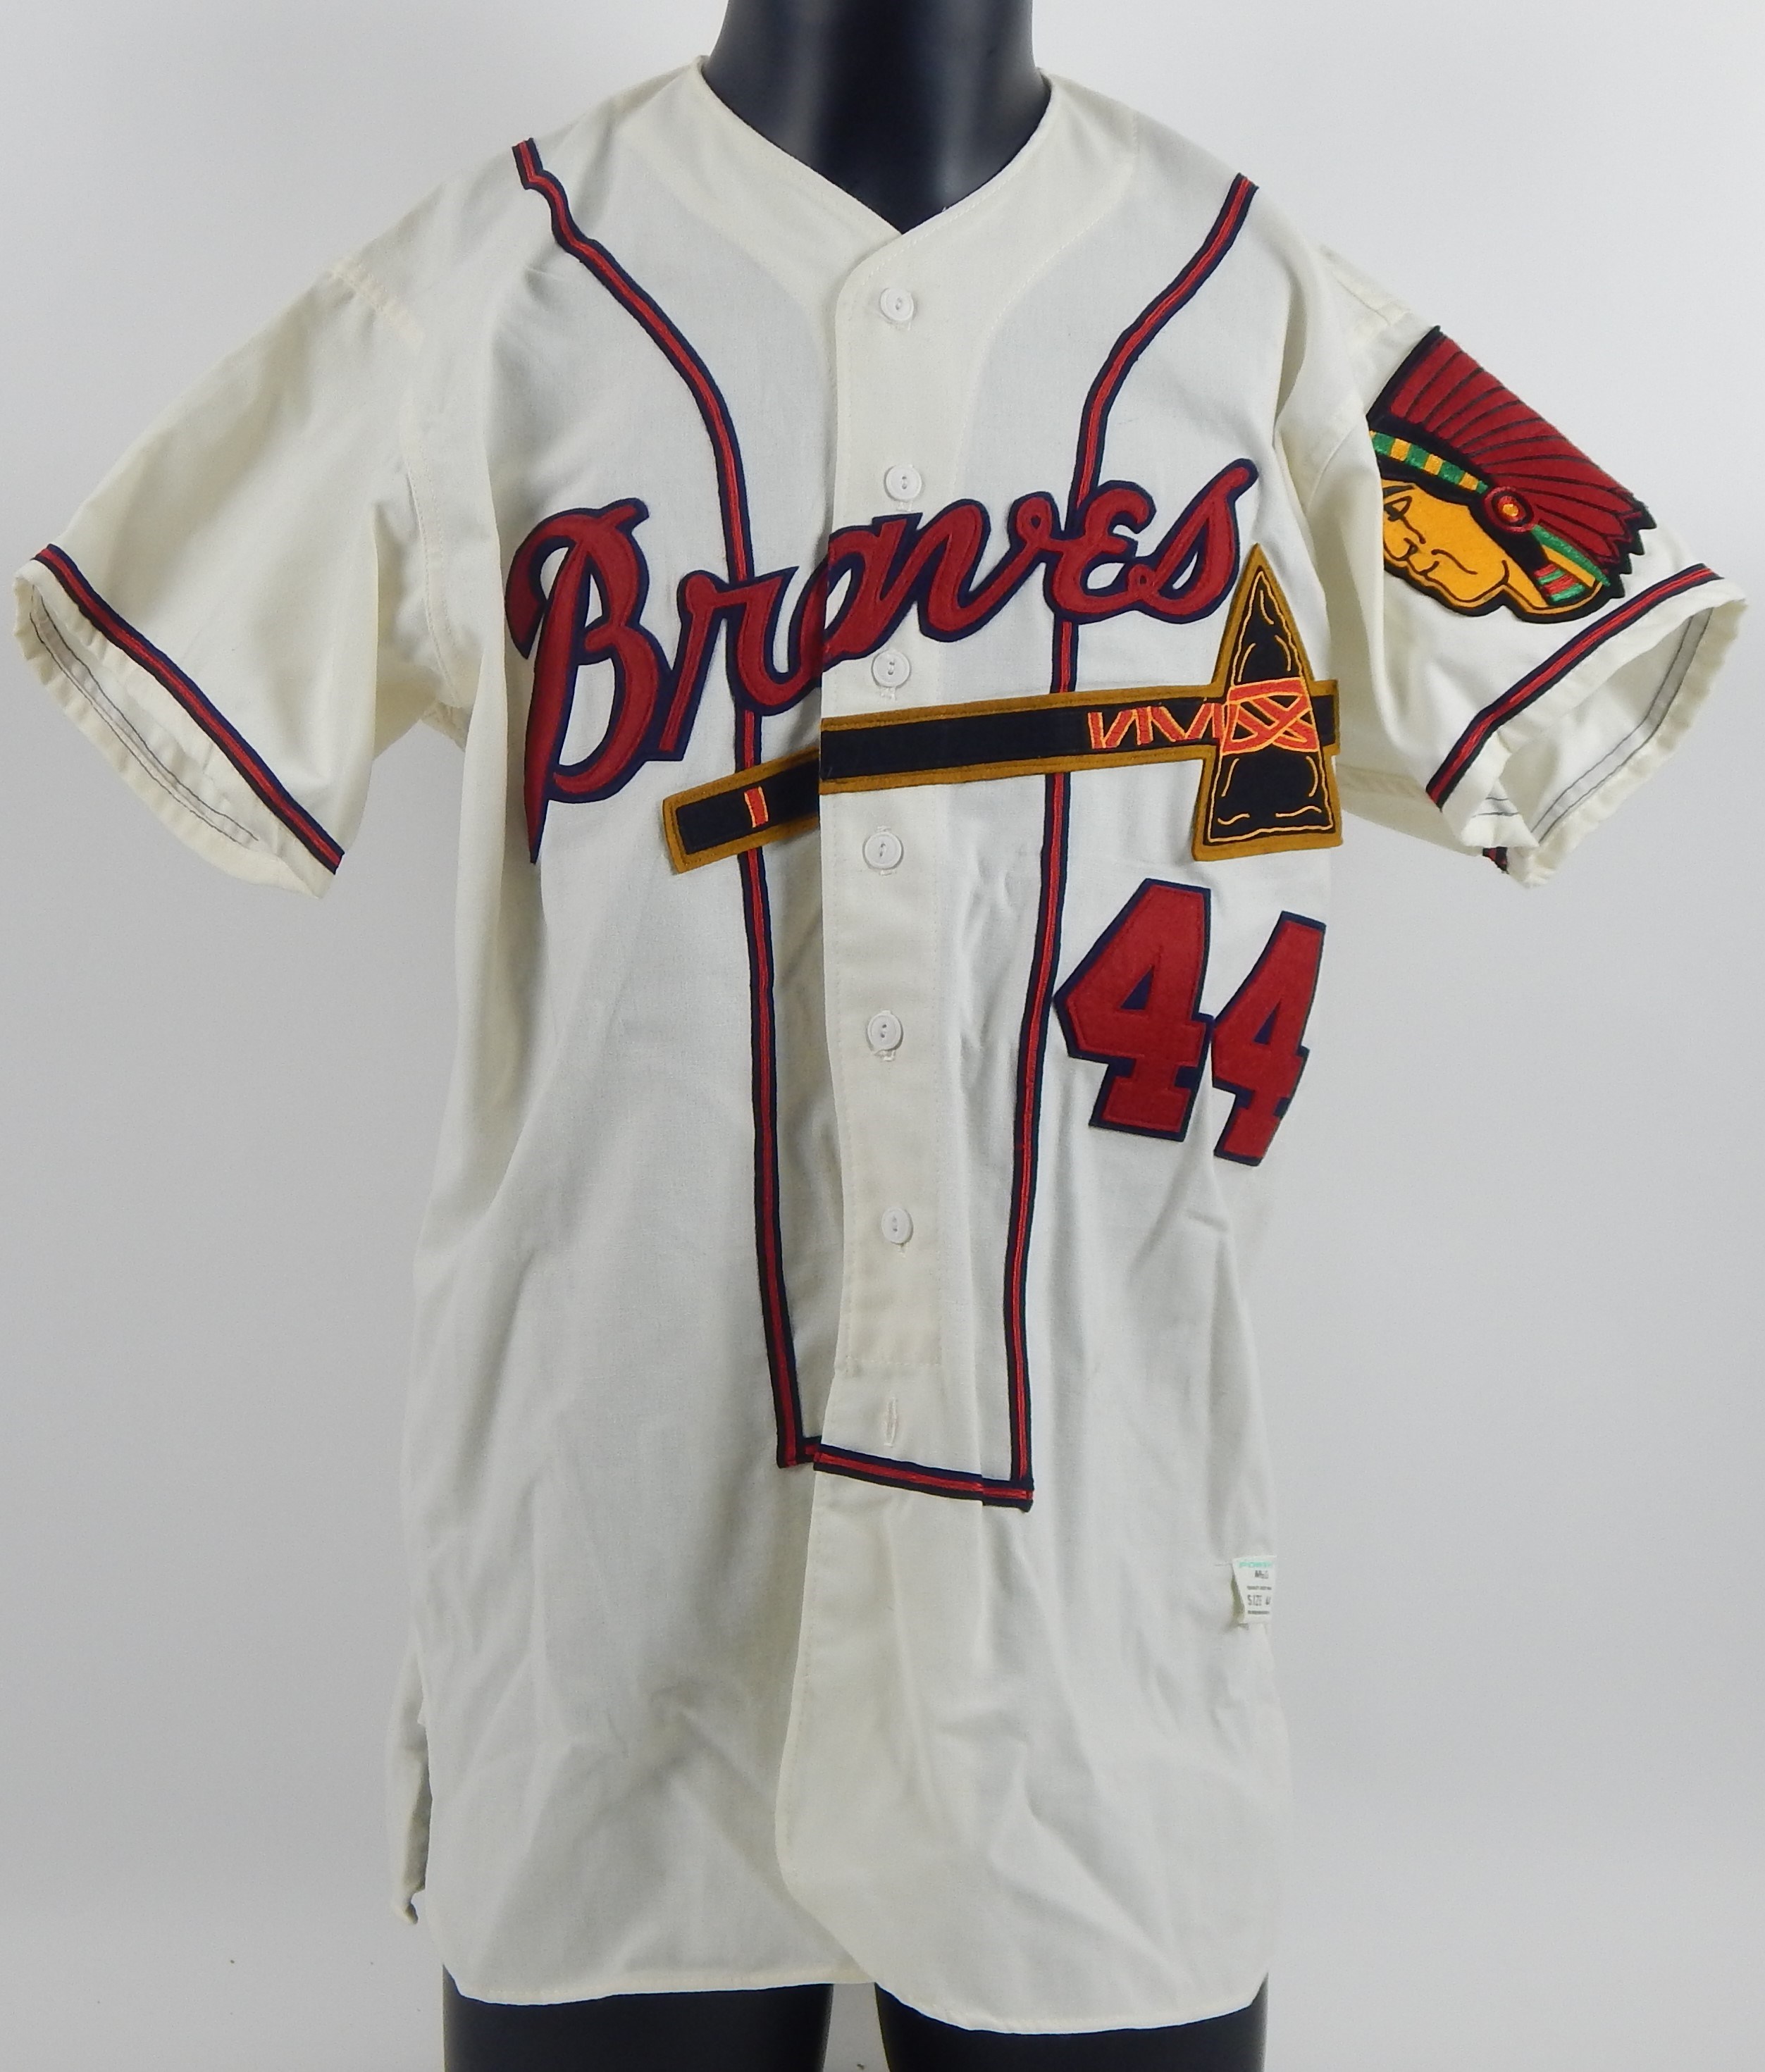 Sold at Auction: A Hank Aaron Signed 1957 Milwaukee Braves